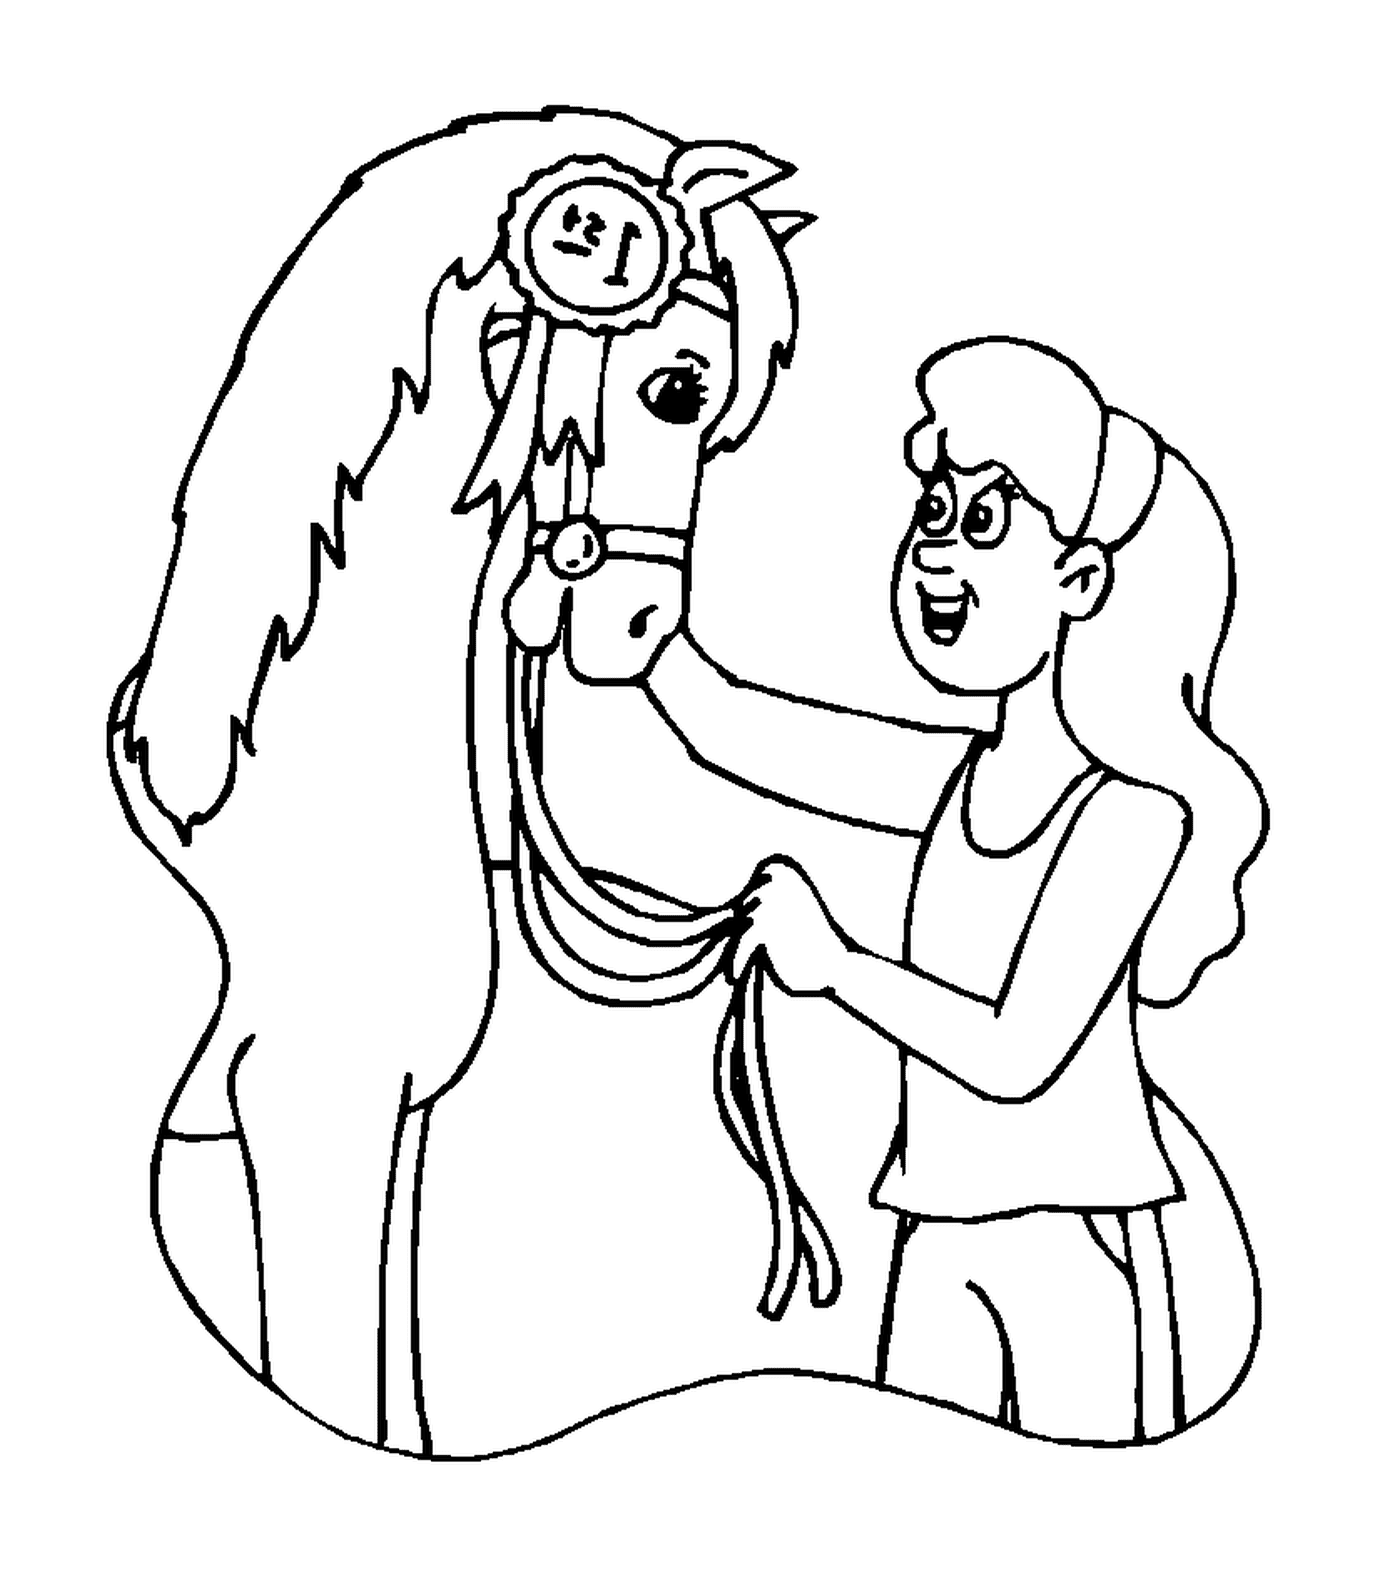  Young girl caring for her horse with tenderness 